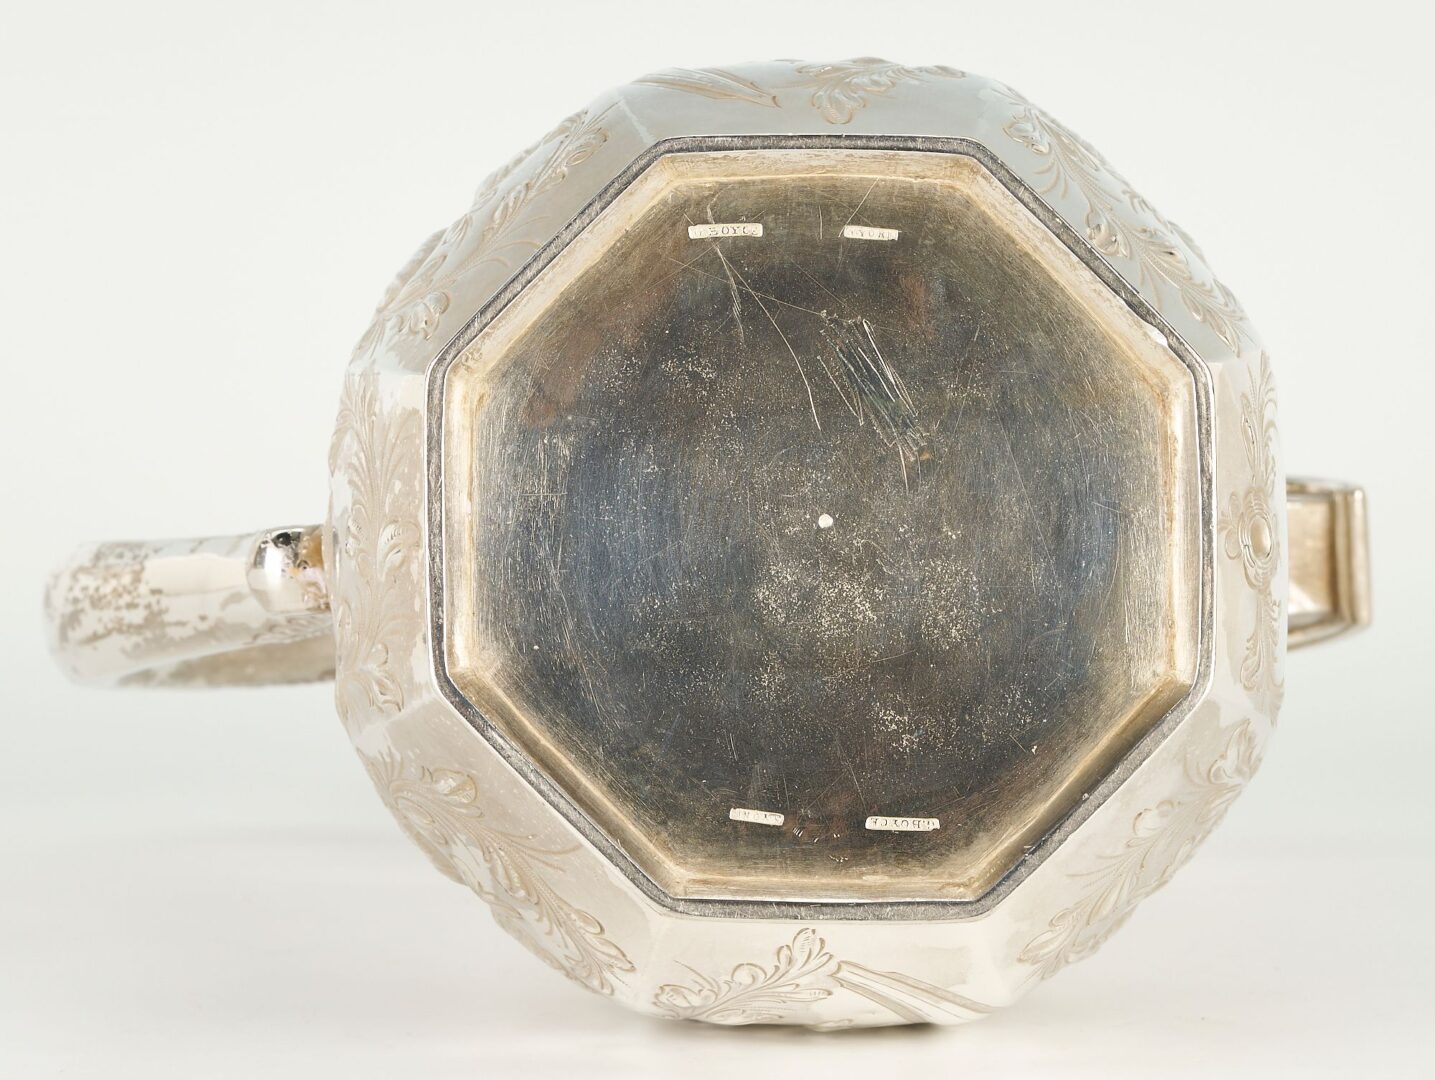 Lot 68: 19th c. Coin Silver Water Pitcher, Octagonal Form, SC History